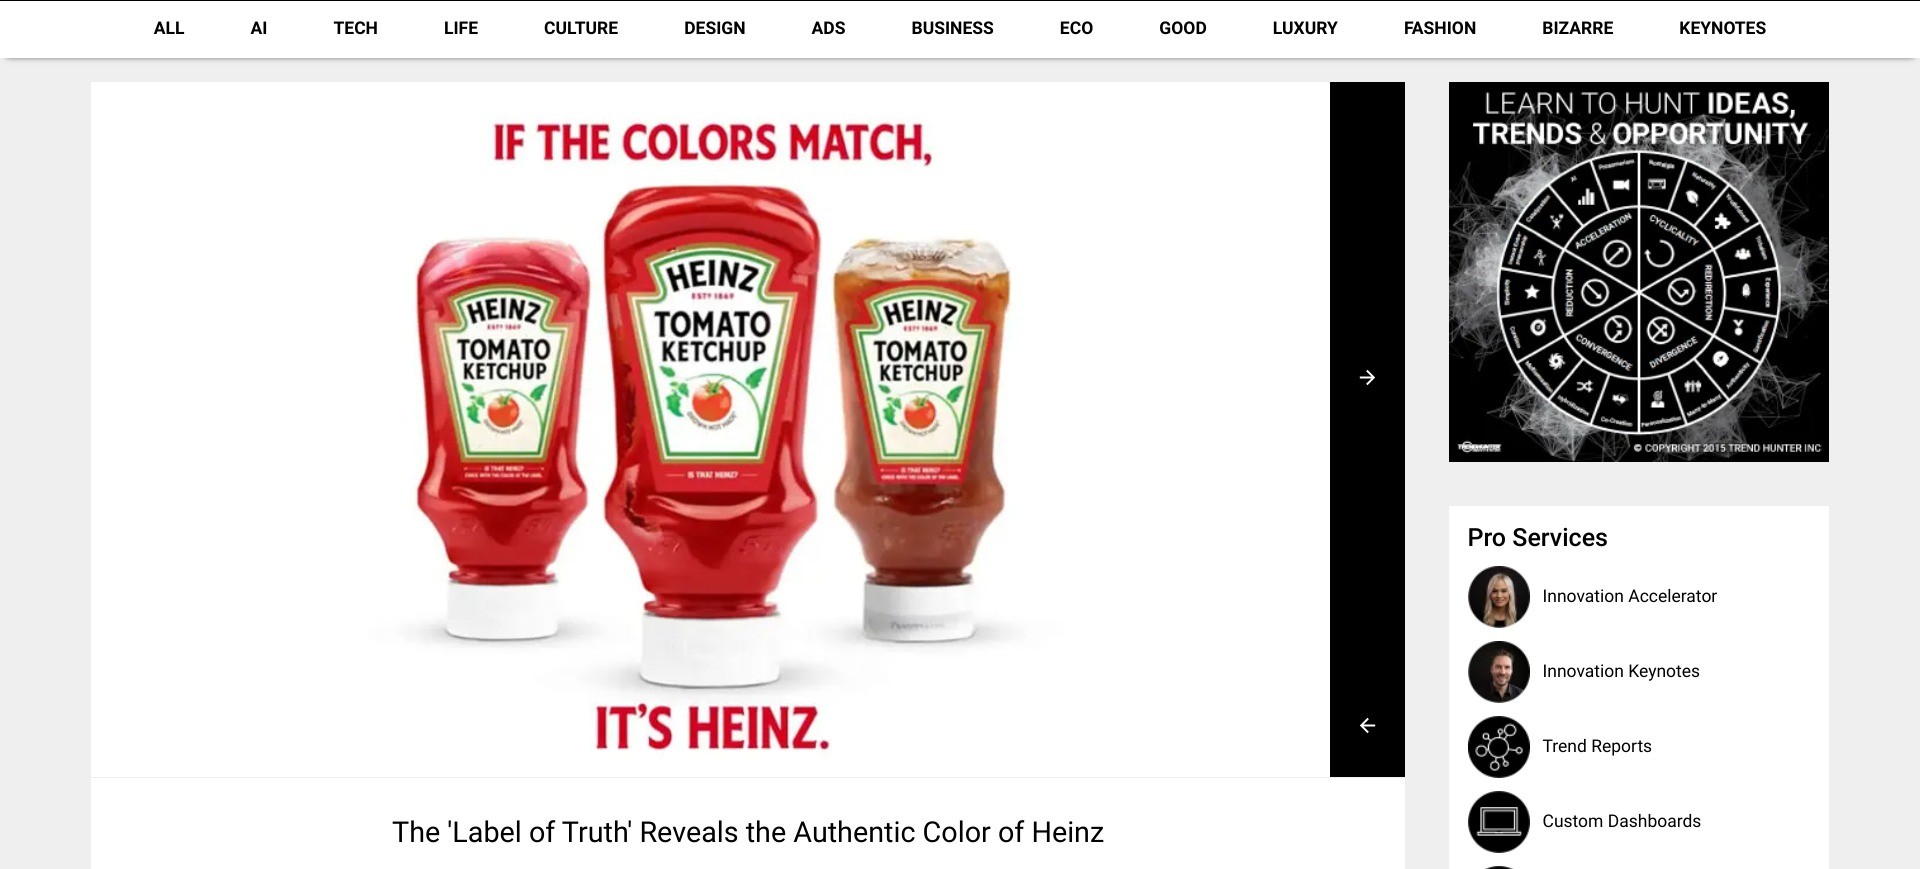 Colour_Match_Ketchup_Labels_ color_of_Heinz_trademark_protection_online_brand_protection_services_globaleyez.jpg